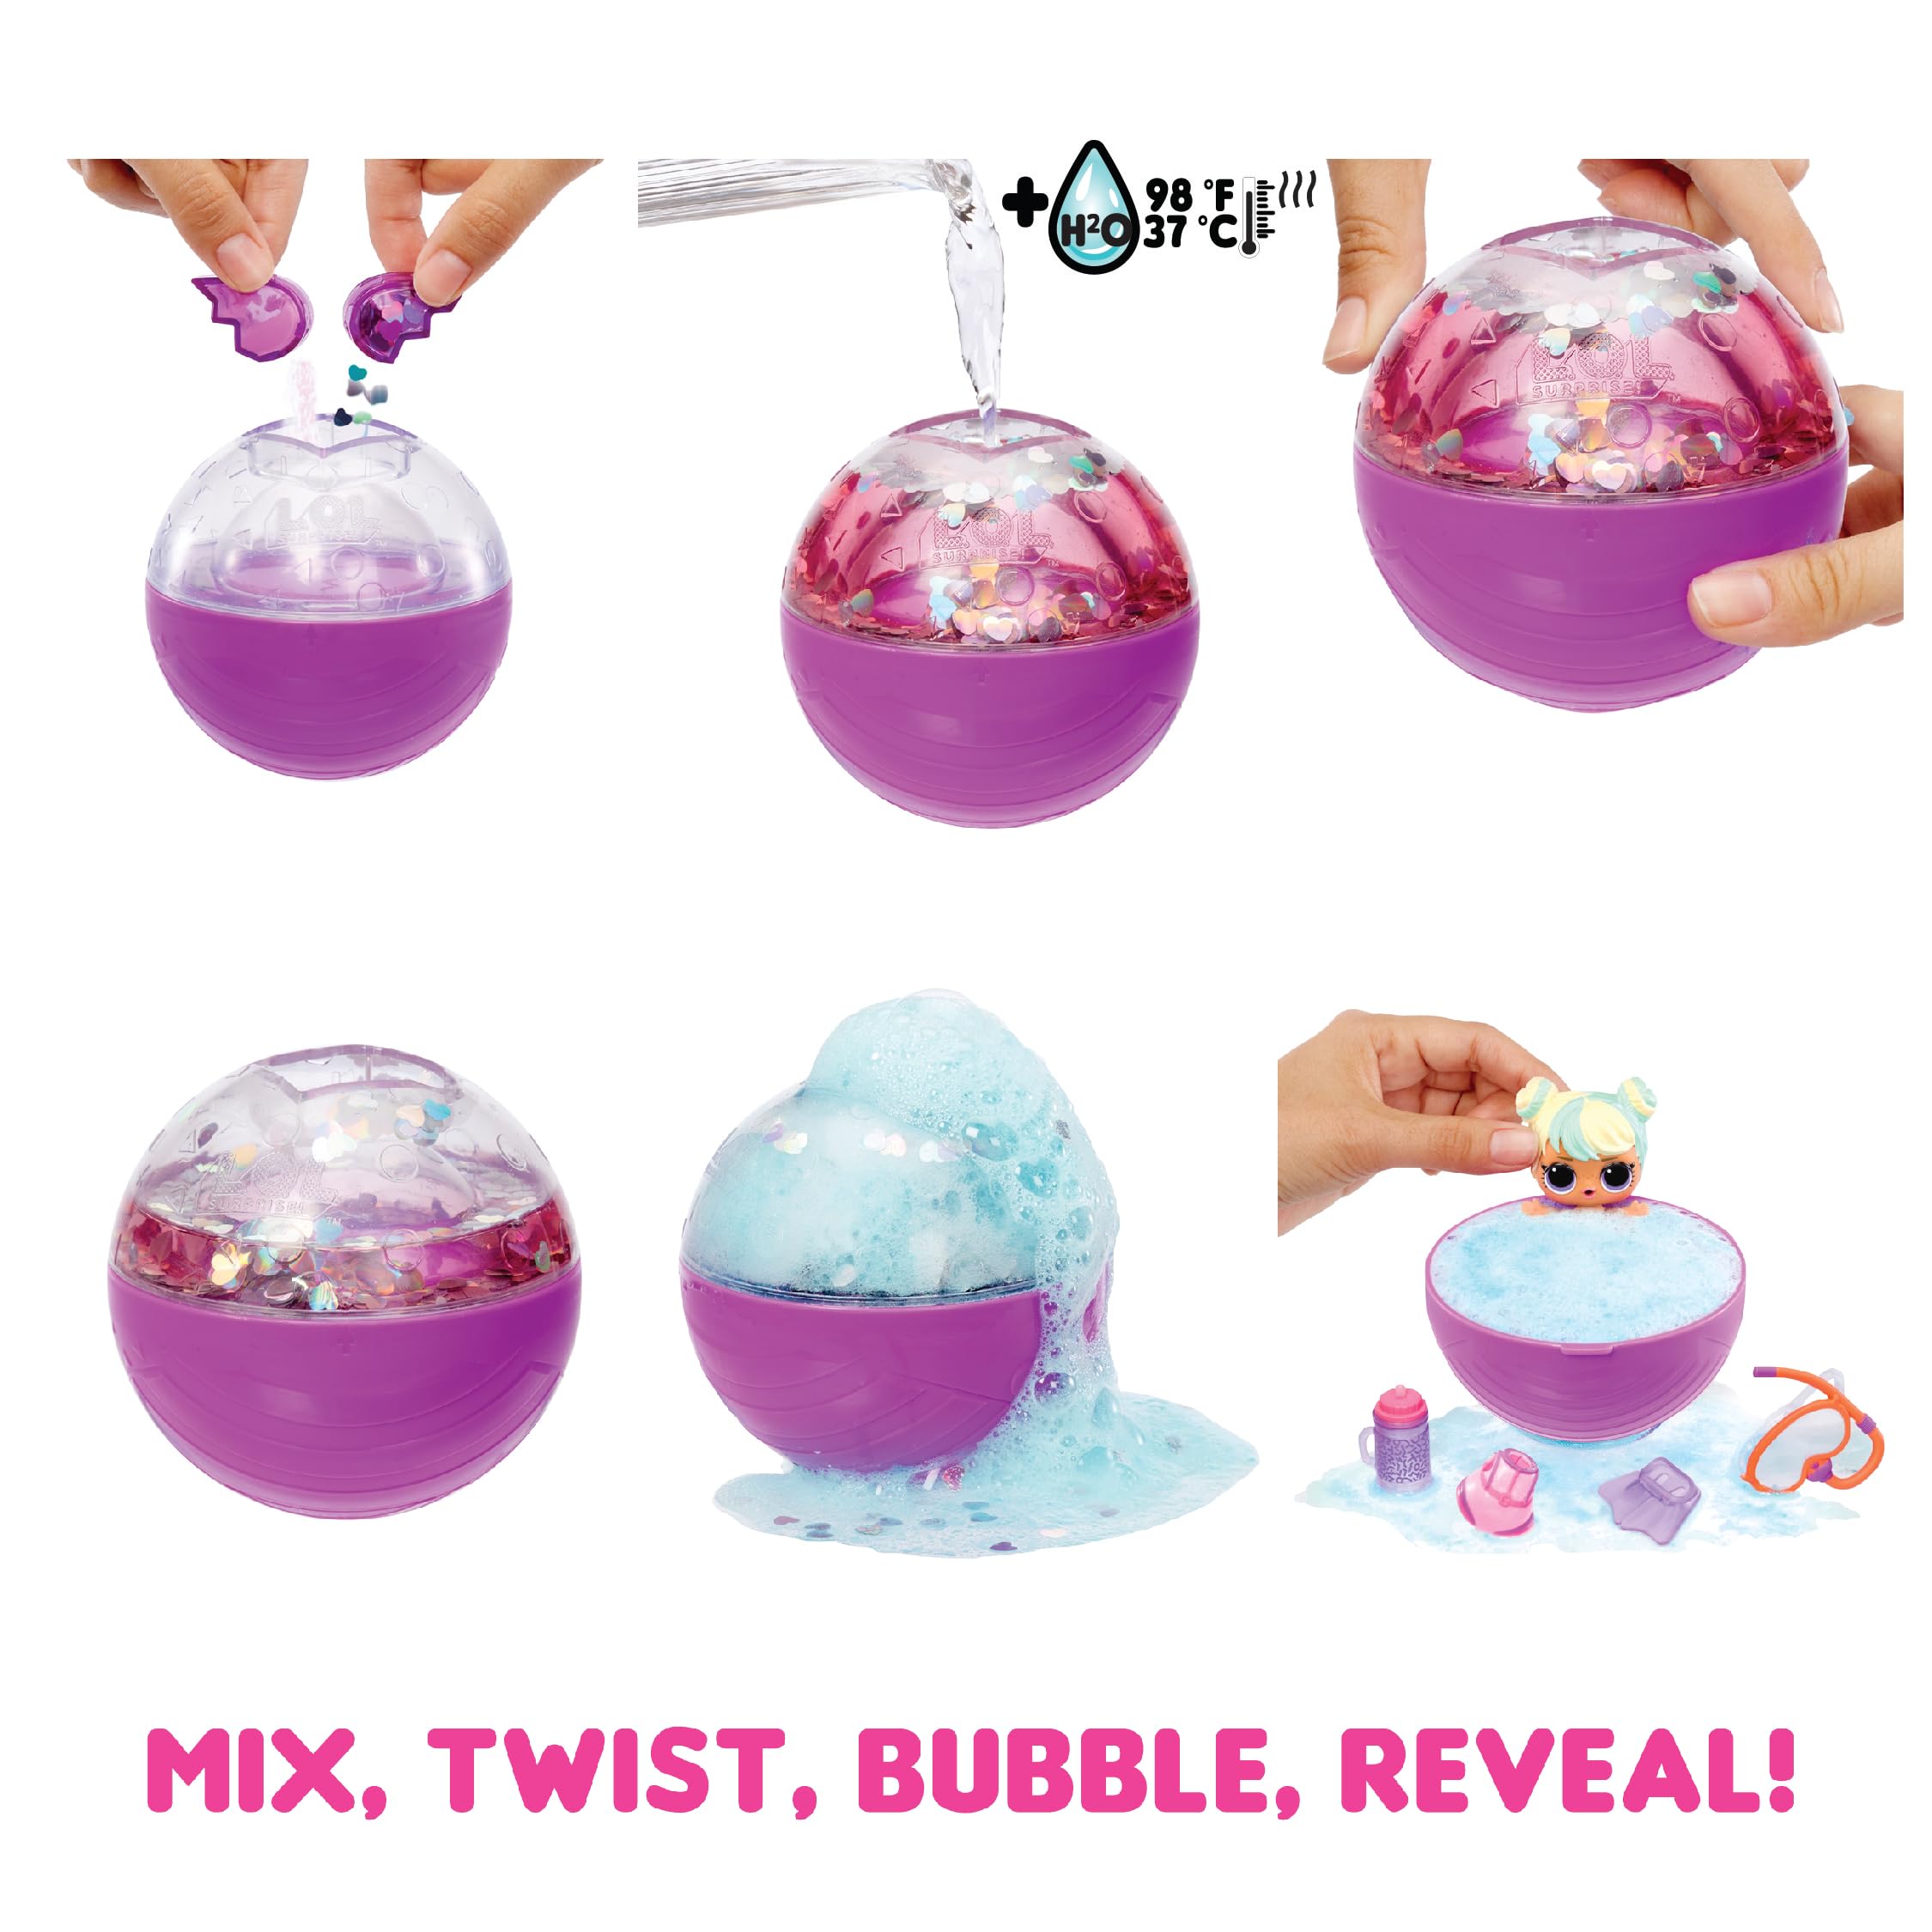 LOL Surprise Bubble Surprise Dolls - Collectible Doll, Surprises, Accessories, Bubble Surprise Unboxing, Glitter Foam Reaction - Great Gift for Girls Age 4+